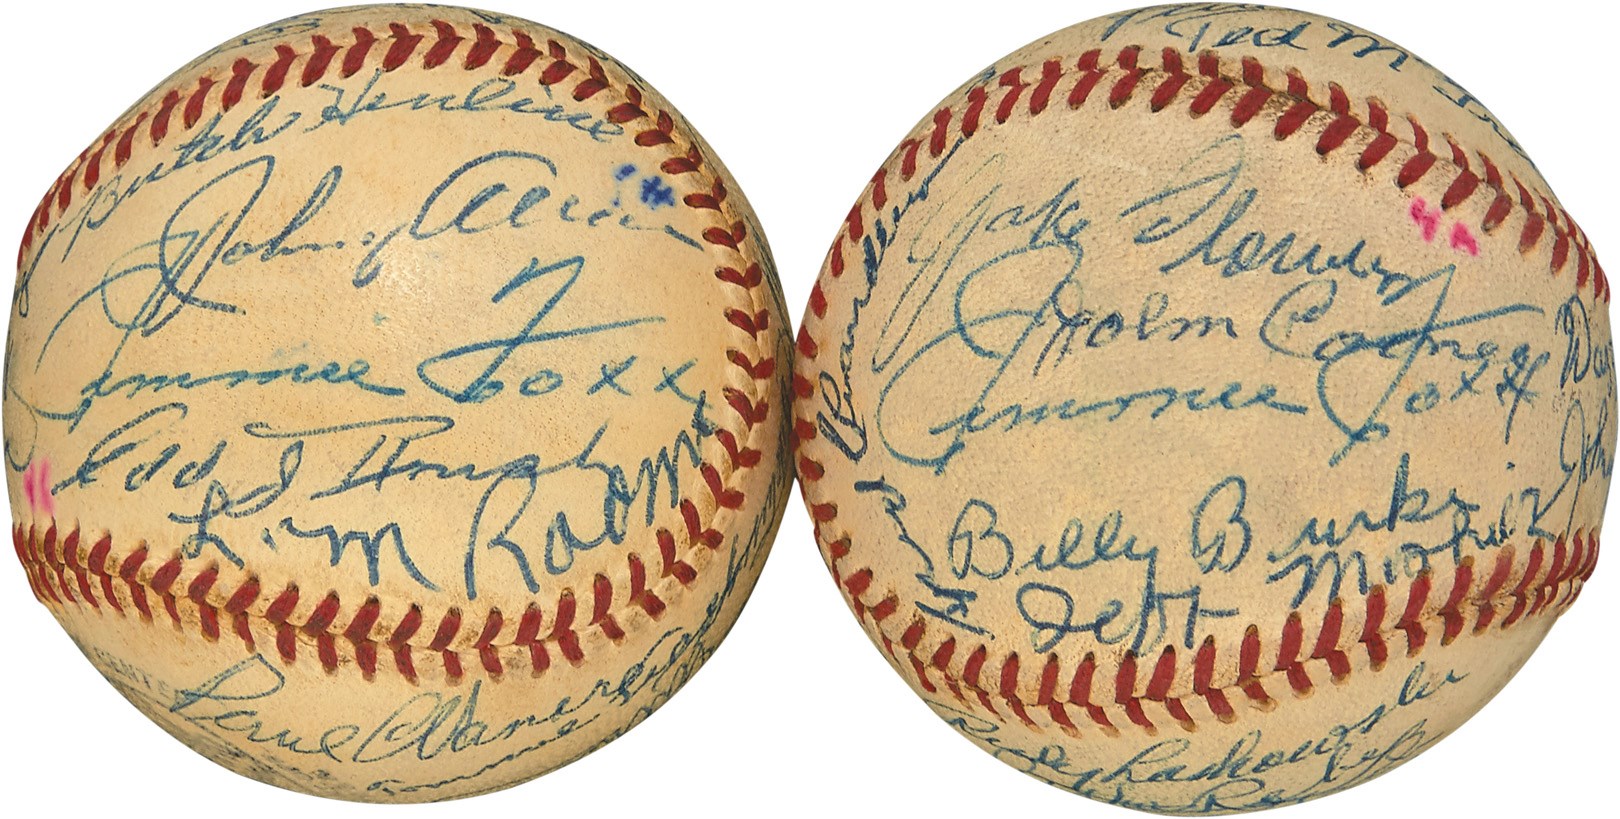 - 1956 Old Timer's Day Heavily Signed Baseball Pair w/Jimmie Foxx (PSA)